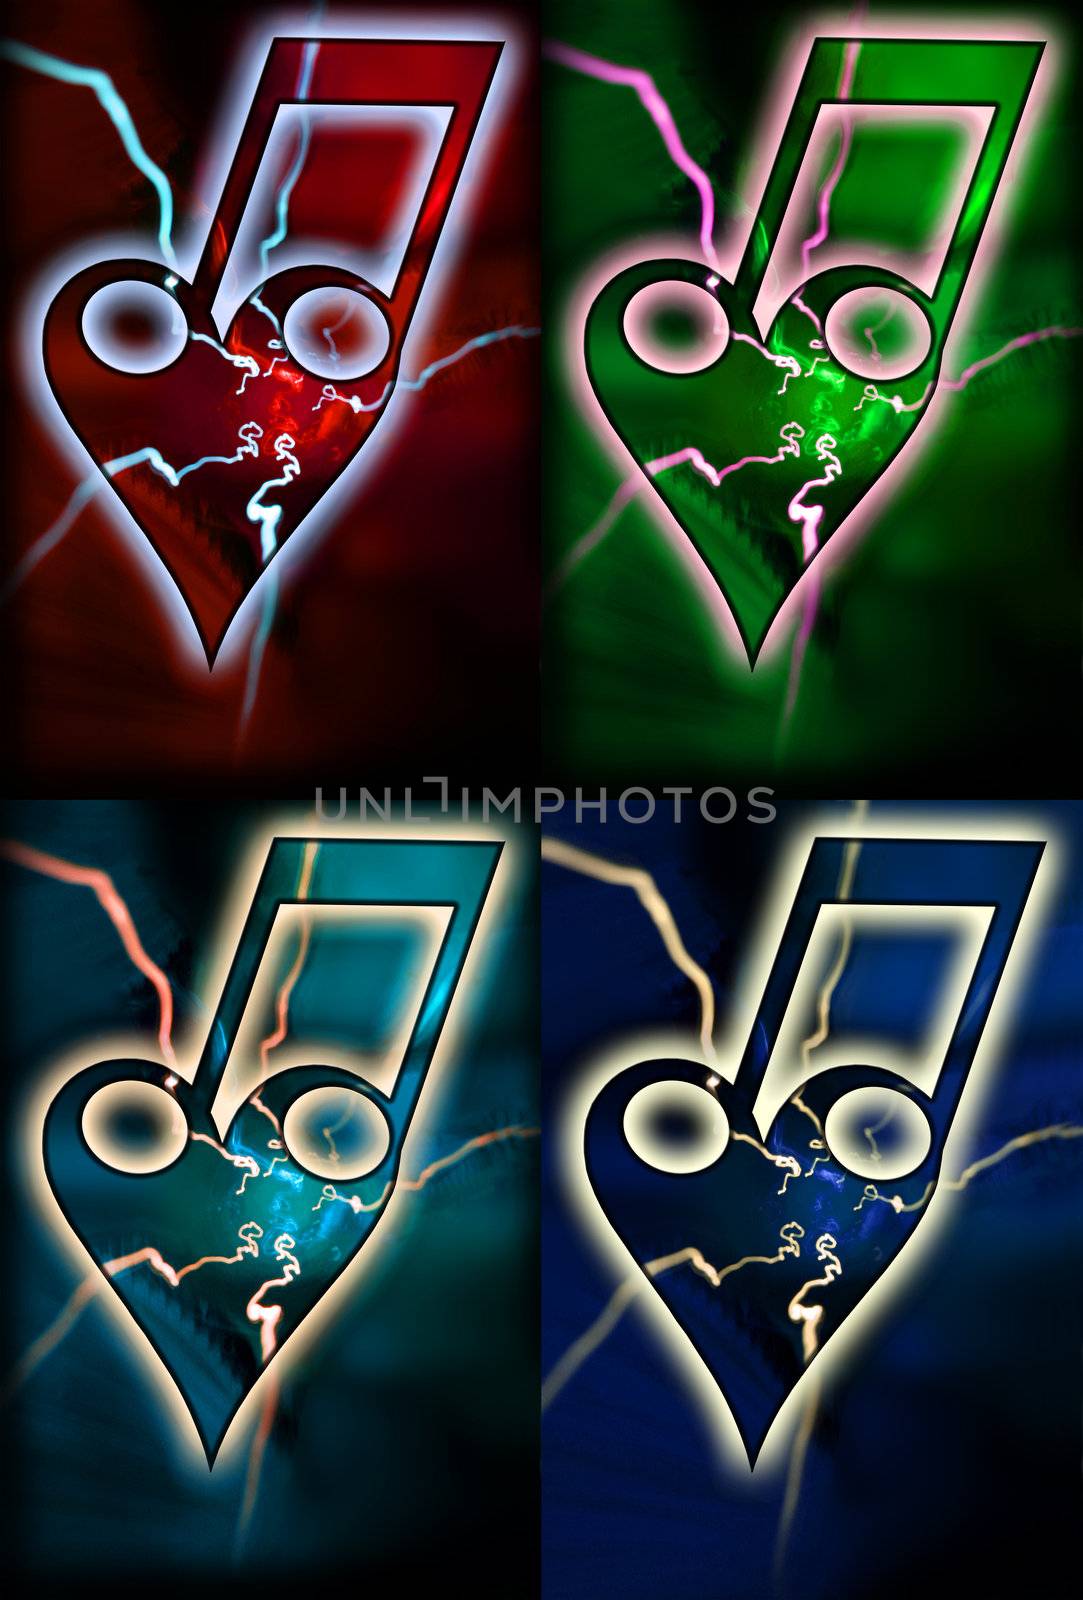 Four different colored bonds of a heart with two notes and flashes. The love of music...